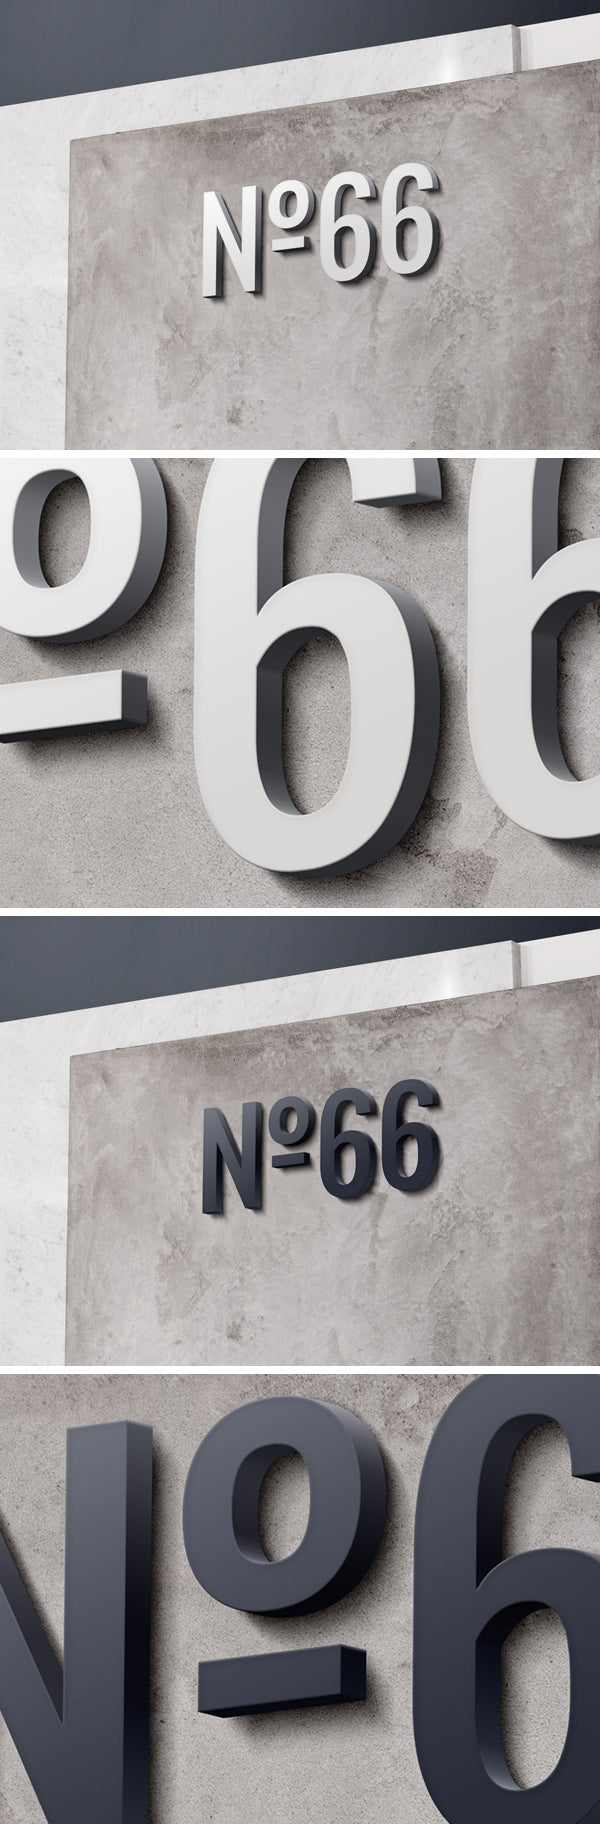 Free 3D Concrete Wall Business Logo Sign MockUp